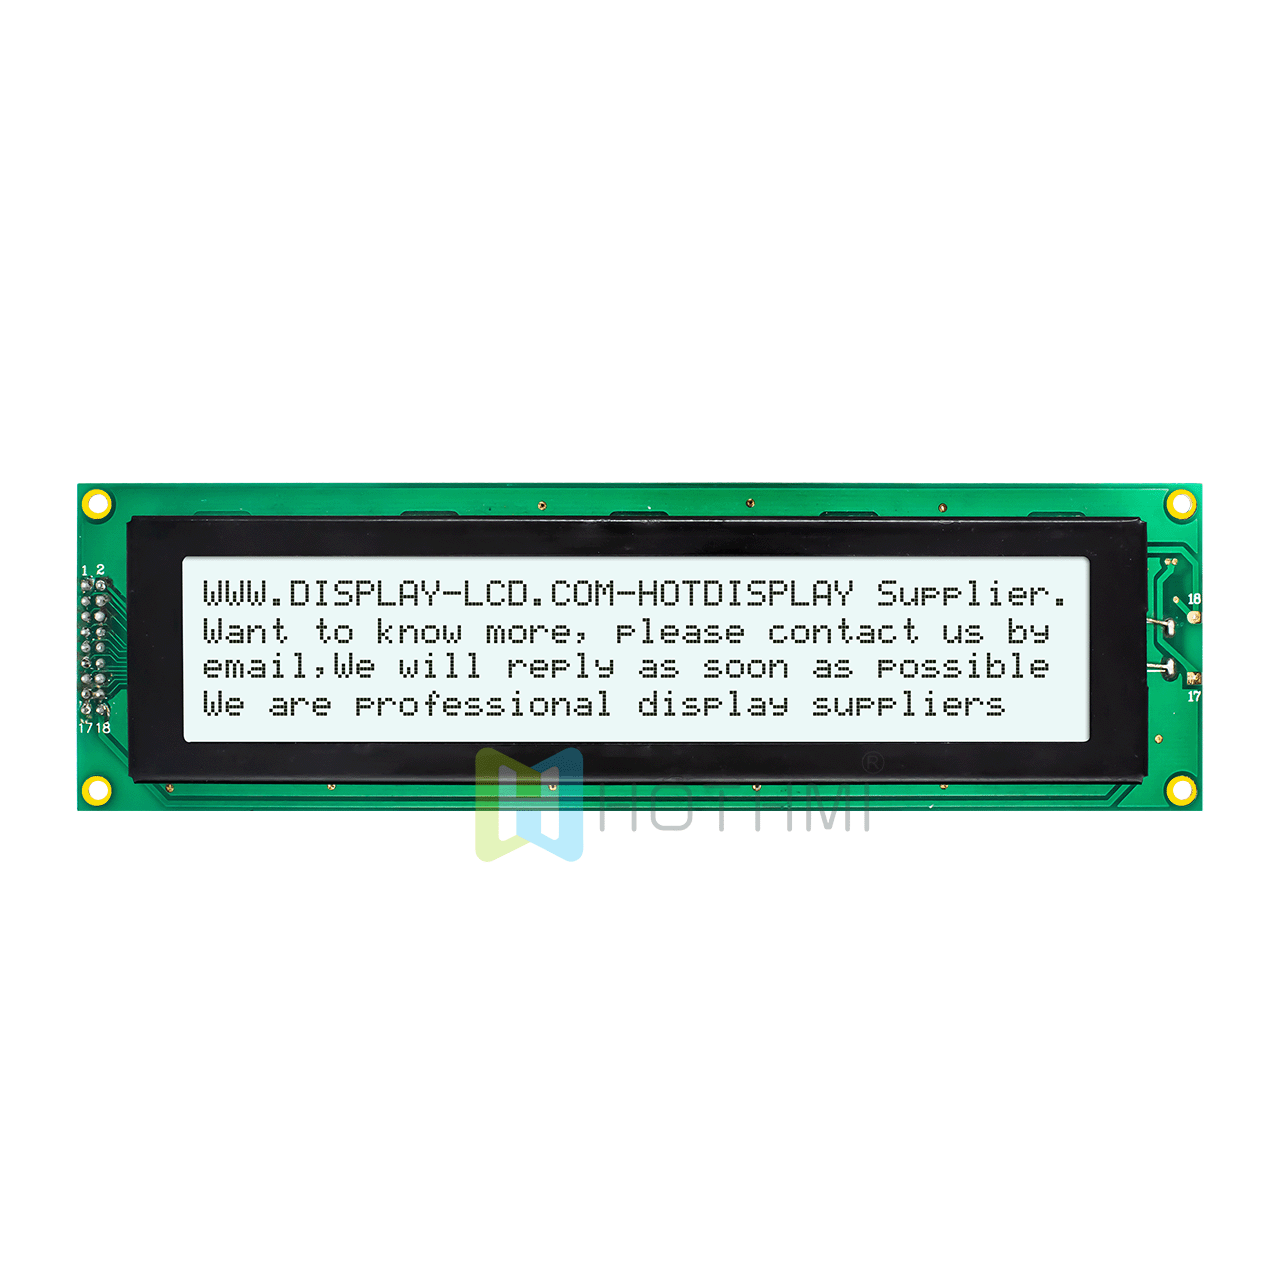 5.0v | 4X40 Character LCD | FSTN Positive Display | With White Backlight | Arduino Display | ST7066U | Transflective Display